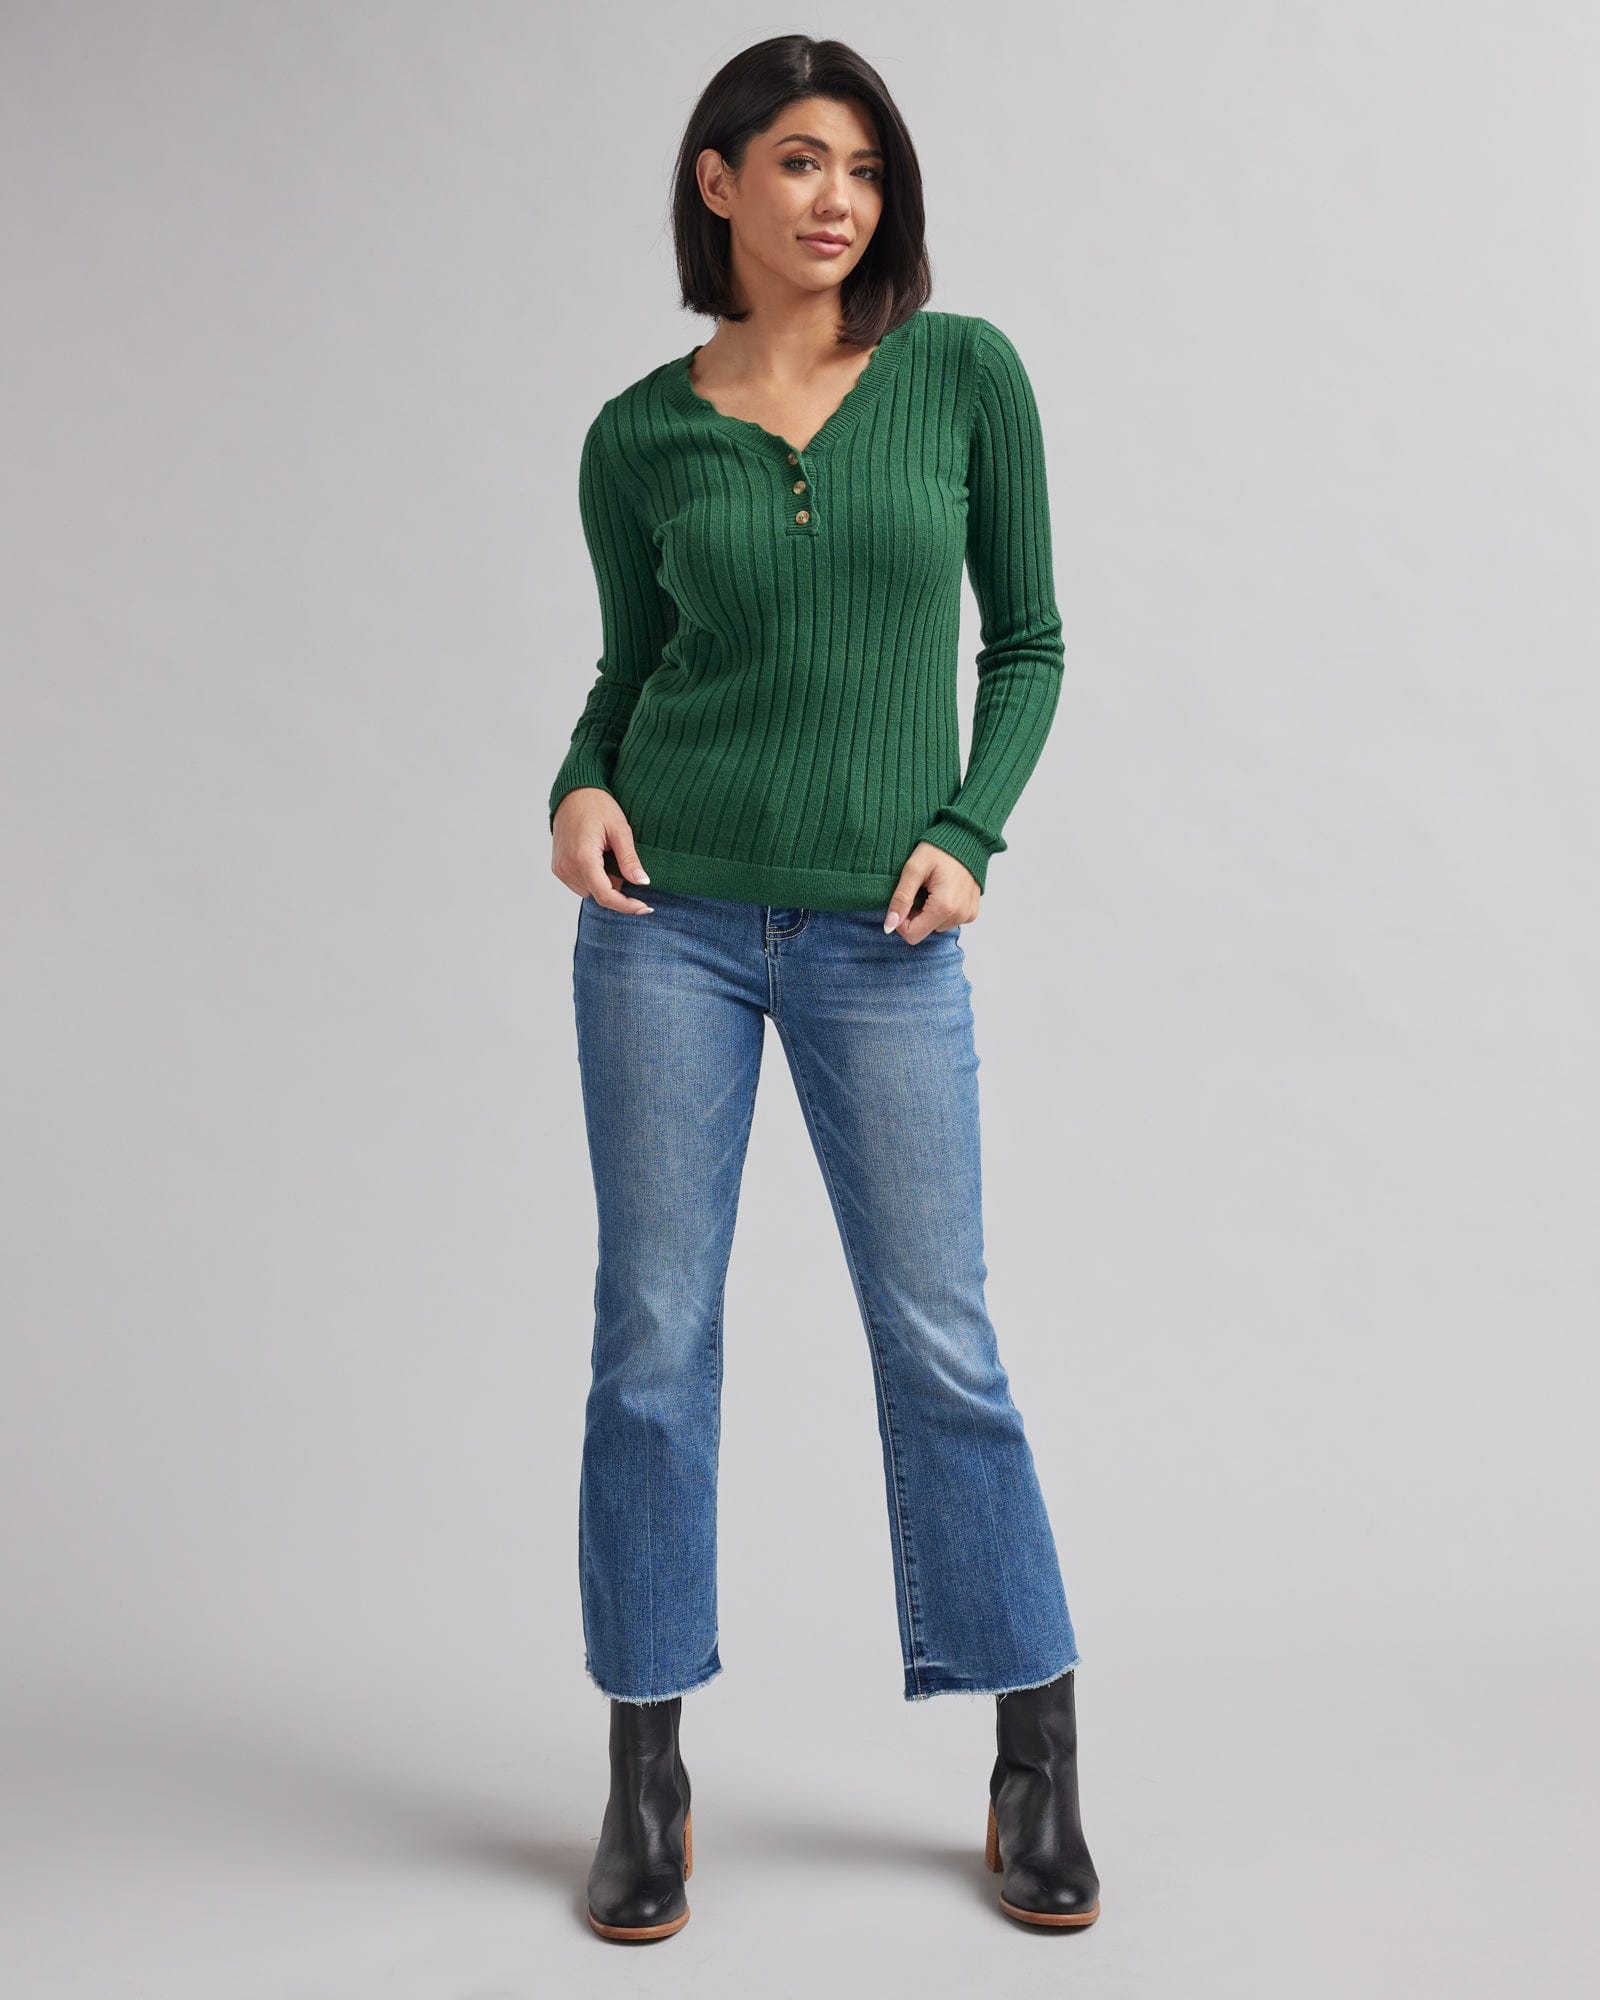 Woman in a long sleeve, green , ribbed sweater